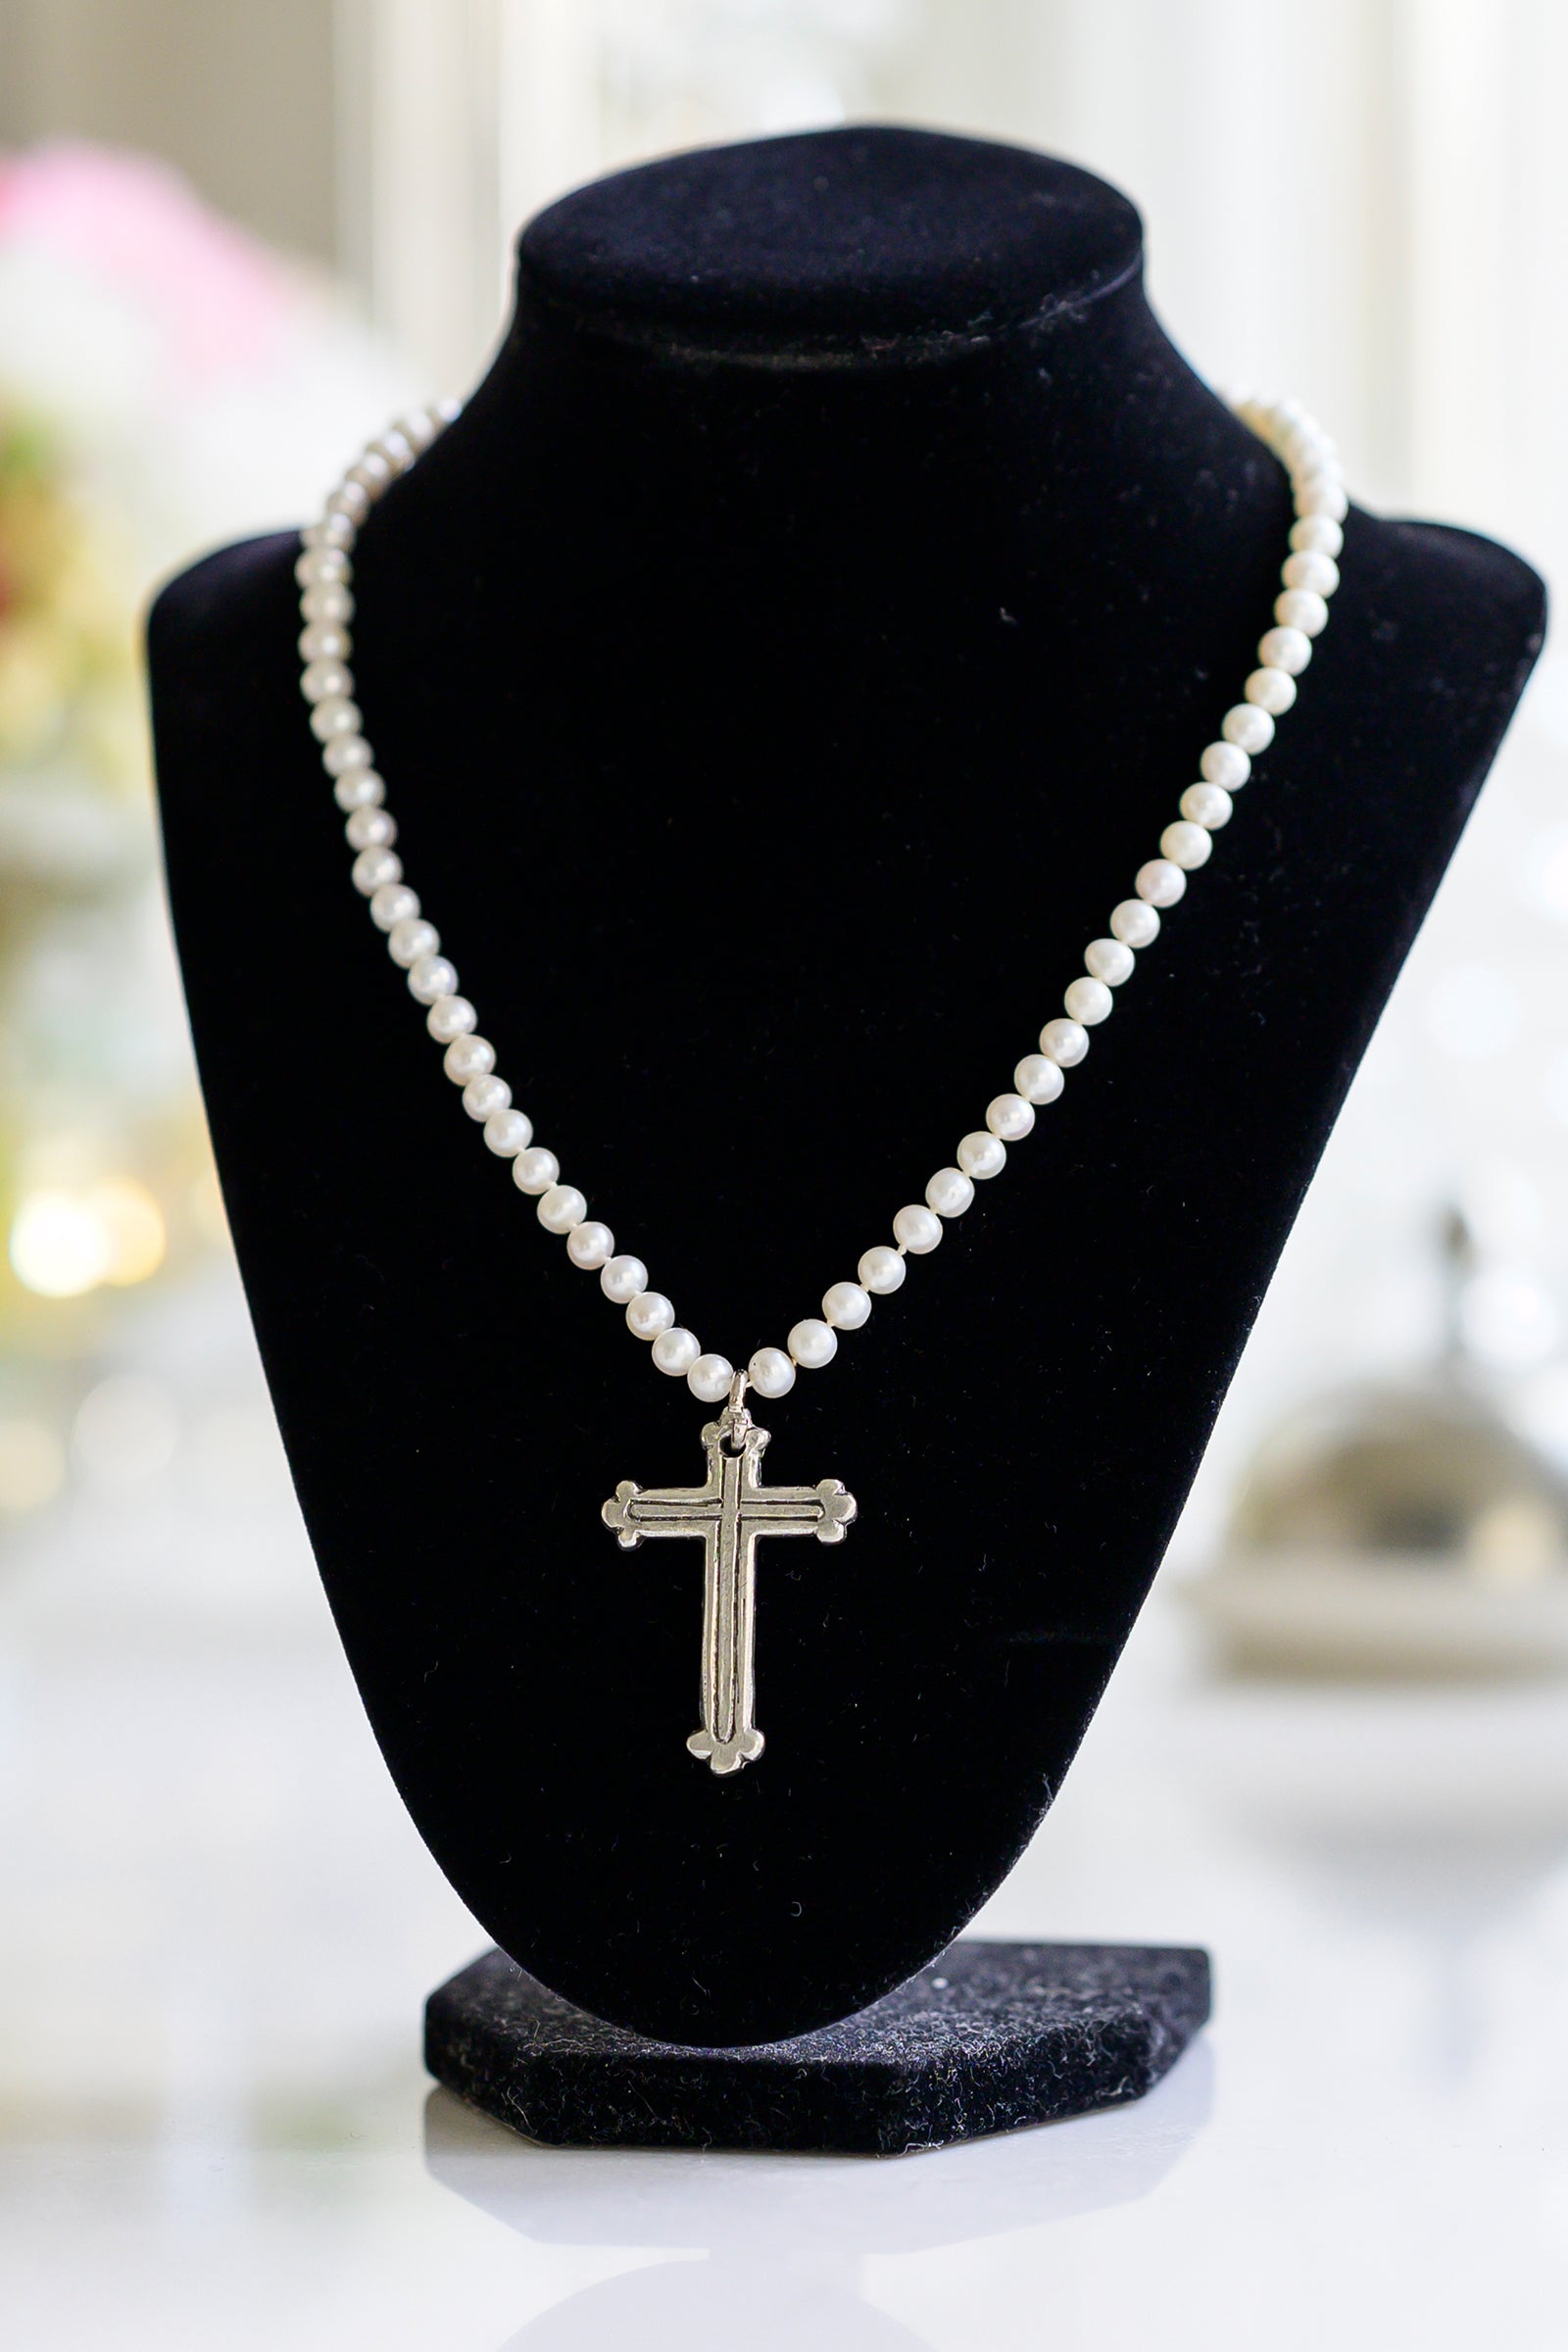 Pearl and Pewter Cross Necklace Small Pearl